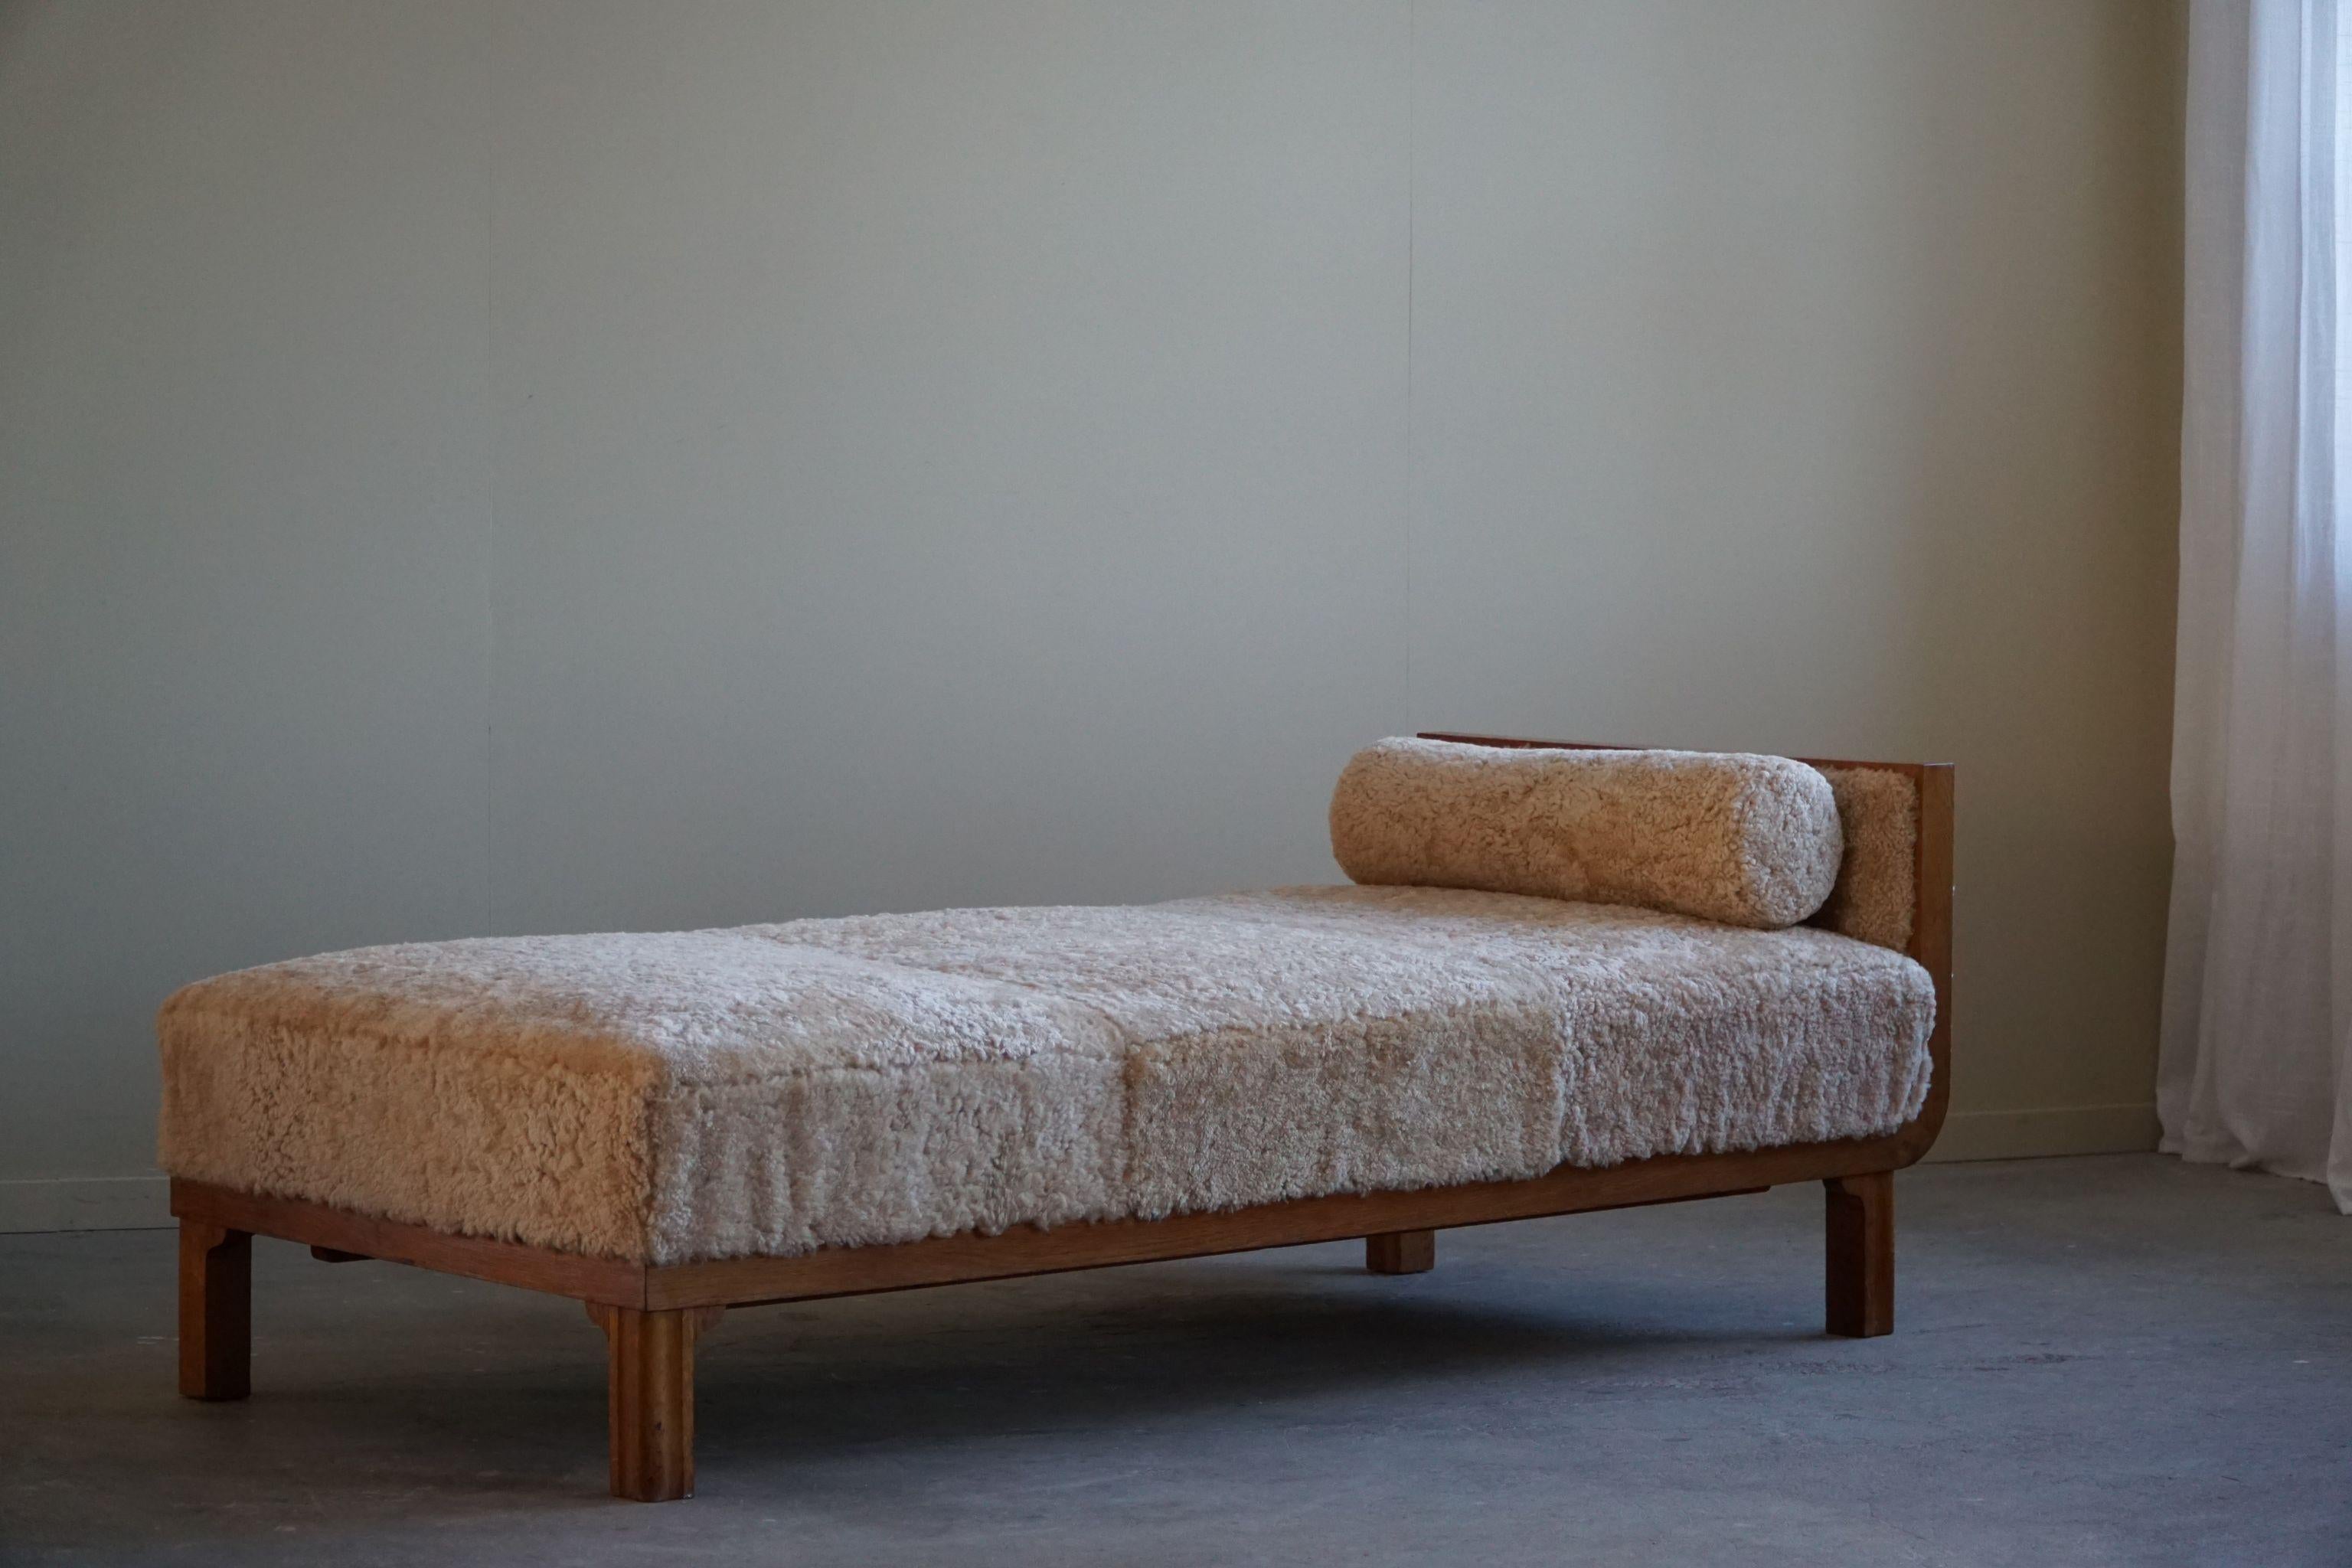 Art Deco Oak Daybed Reupholstered in Lambswool, By a Danish Cabinetmaker, 1940s For Sale 2